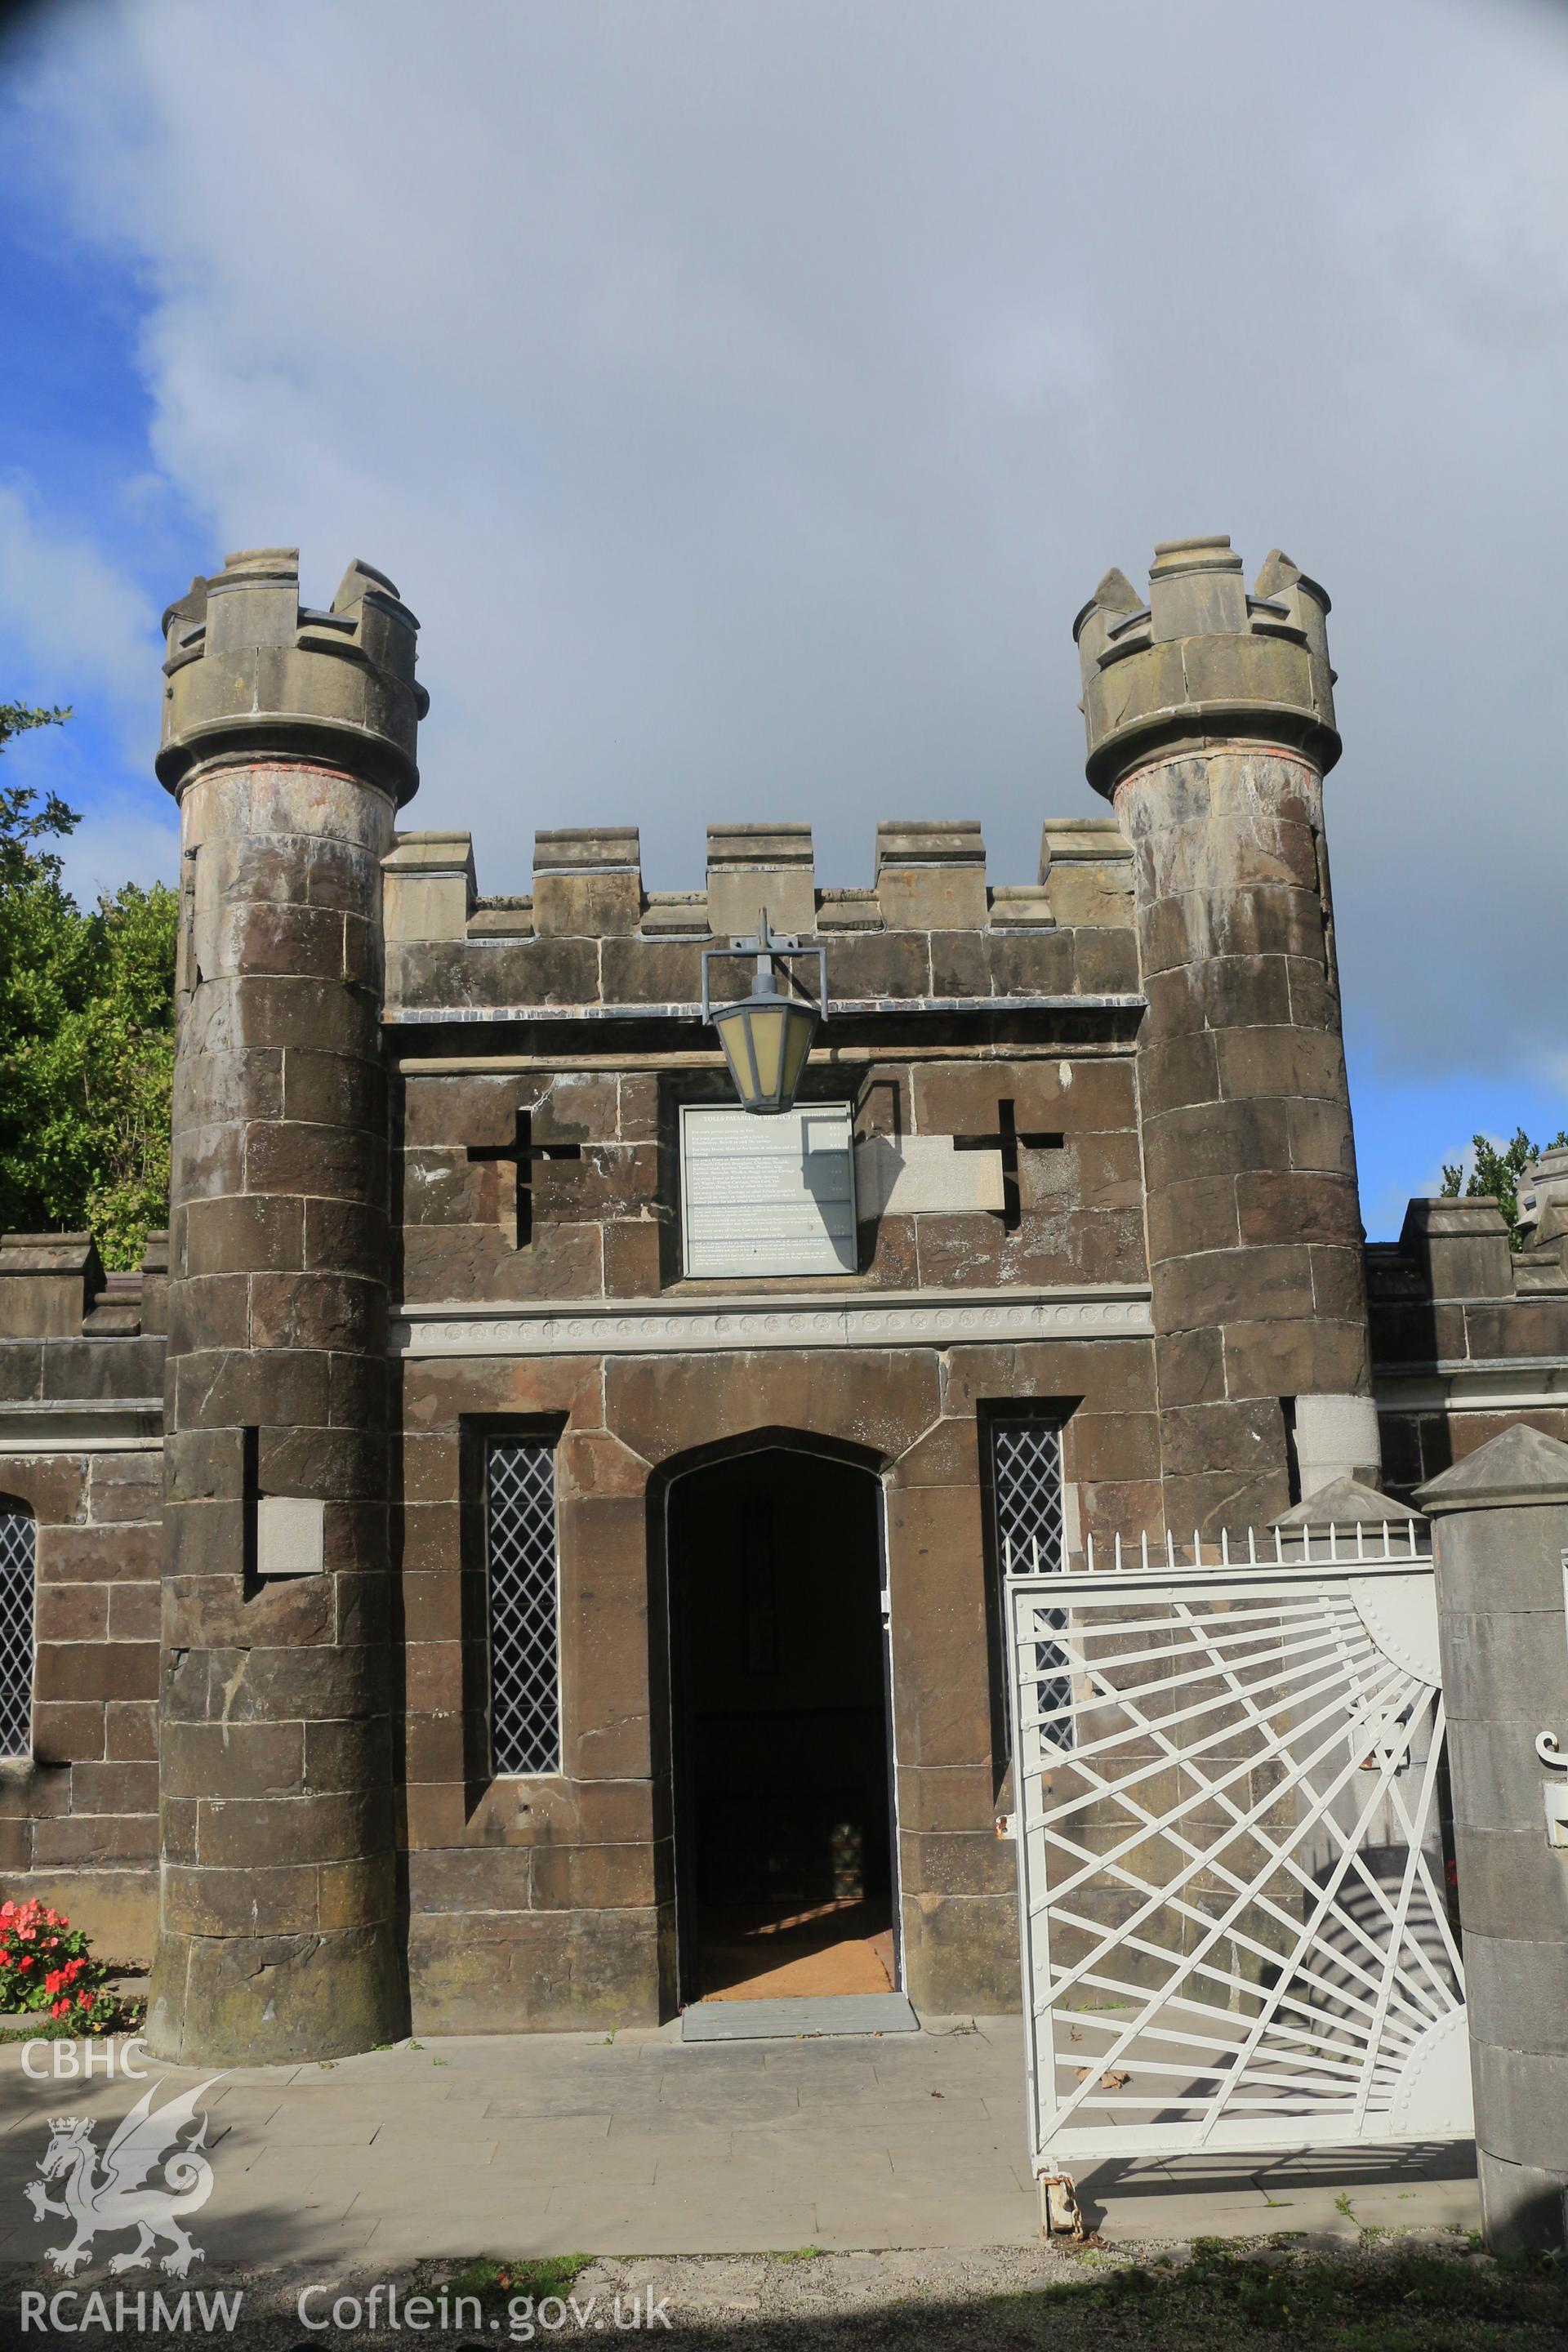 Investigator photographs of Conwy Suspension Bridge Keepers cottage. Exterior: gatekeeper's cottage and opened pedestrian gate showing Thomas Telford's iconic sunburst design.